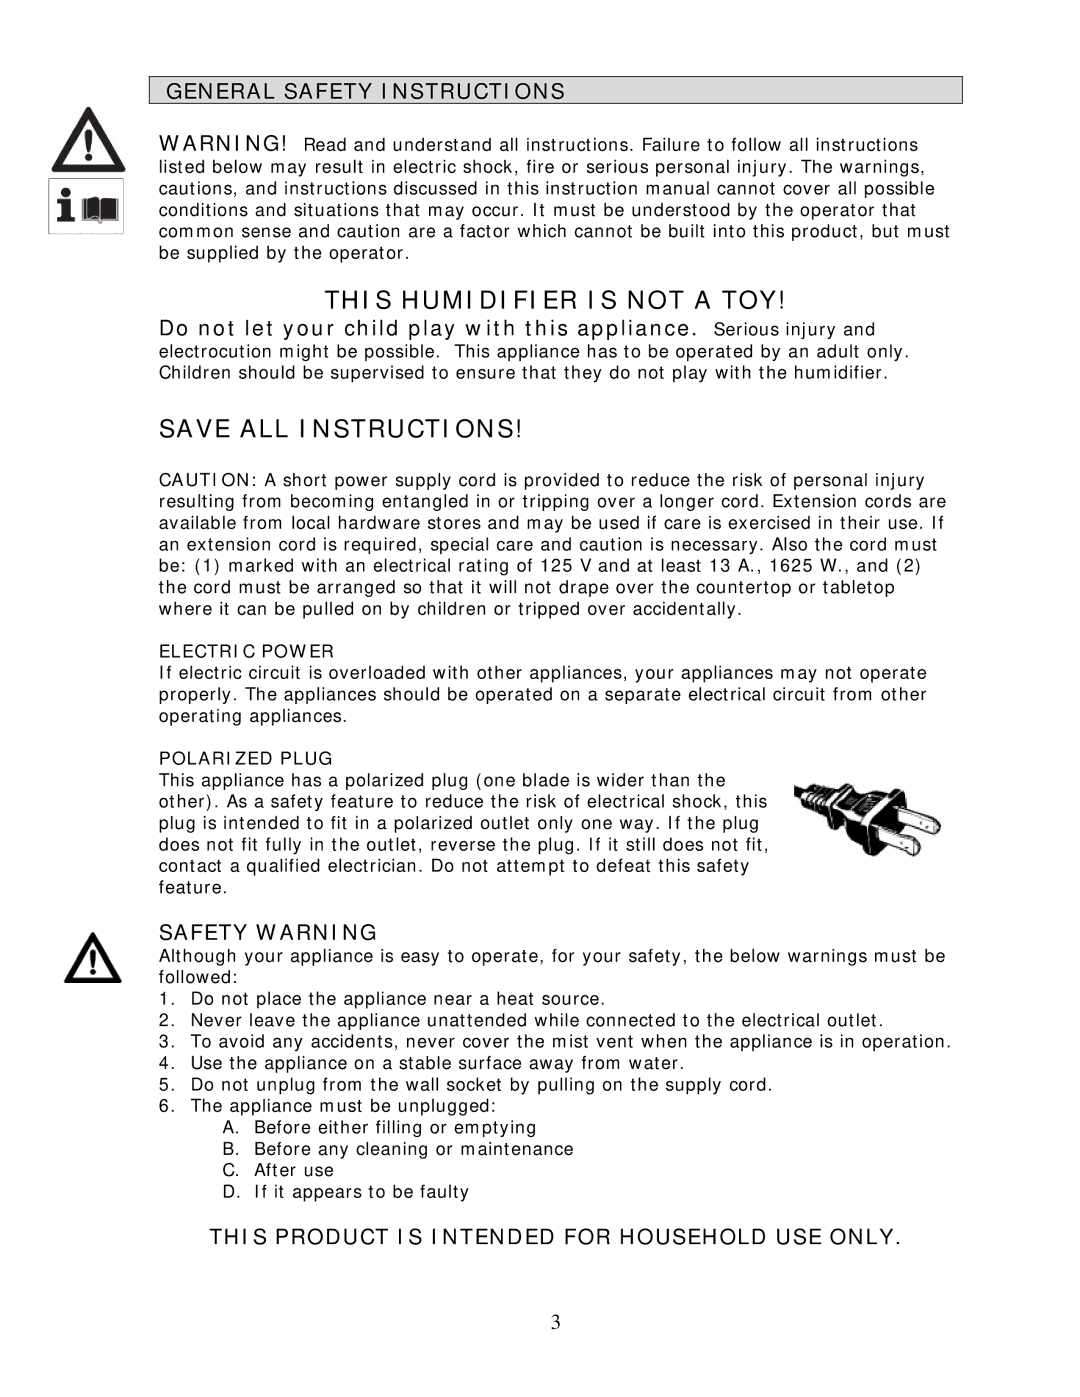 Crane EE-3184-4138 manual General Safety Instructions, Safety Warning, This Product is Intended for Household USE only 